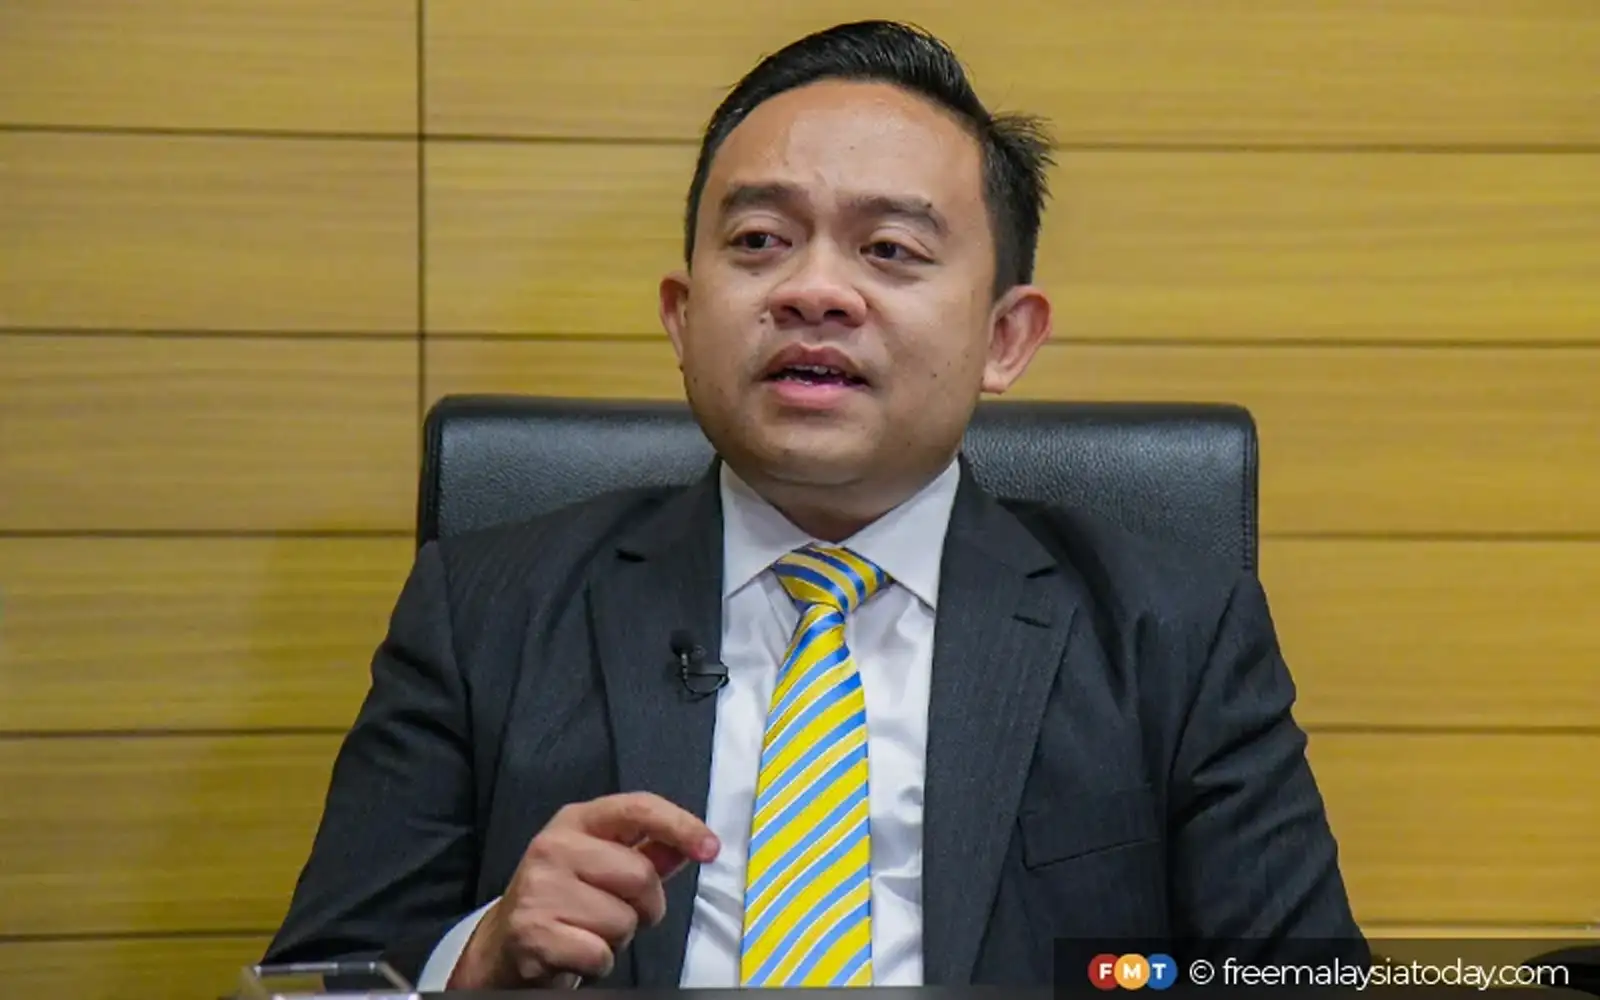 slump in press freedom ranking due to ‘iron-fisted’ policies, claims wan saiful